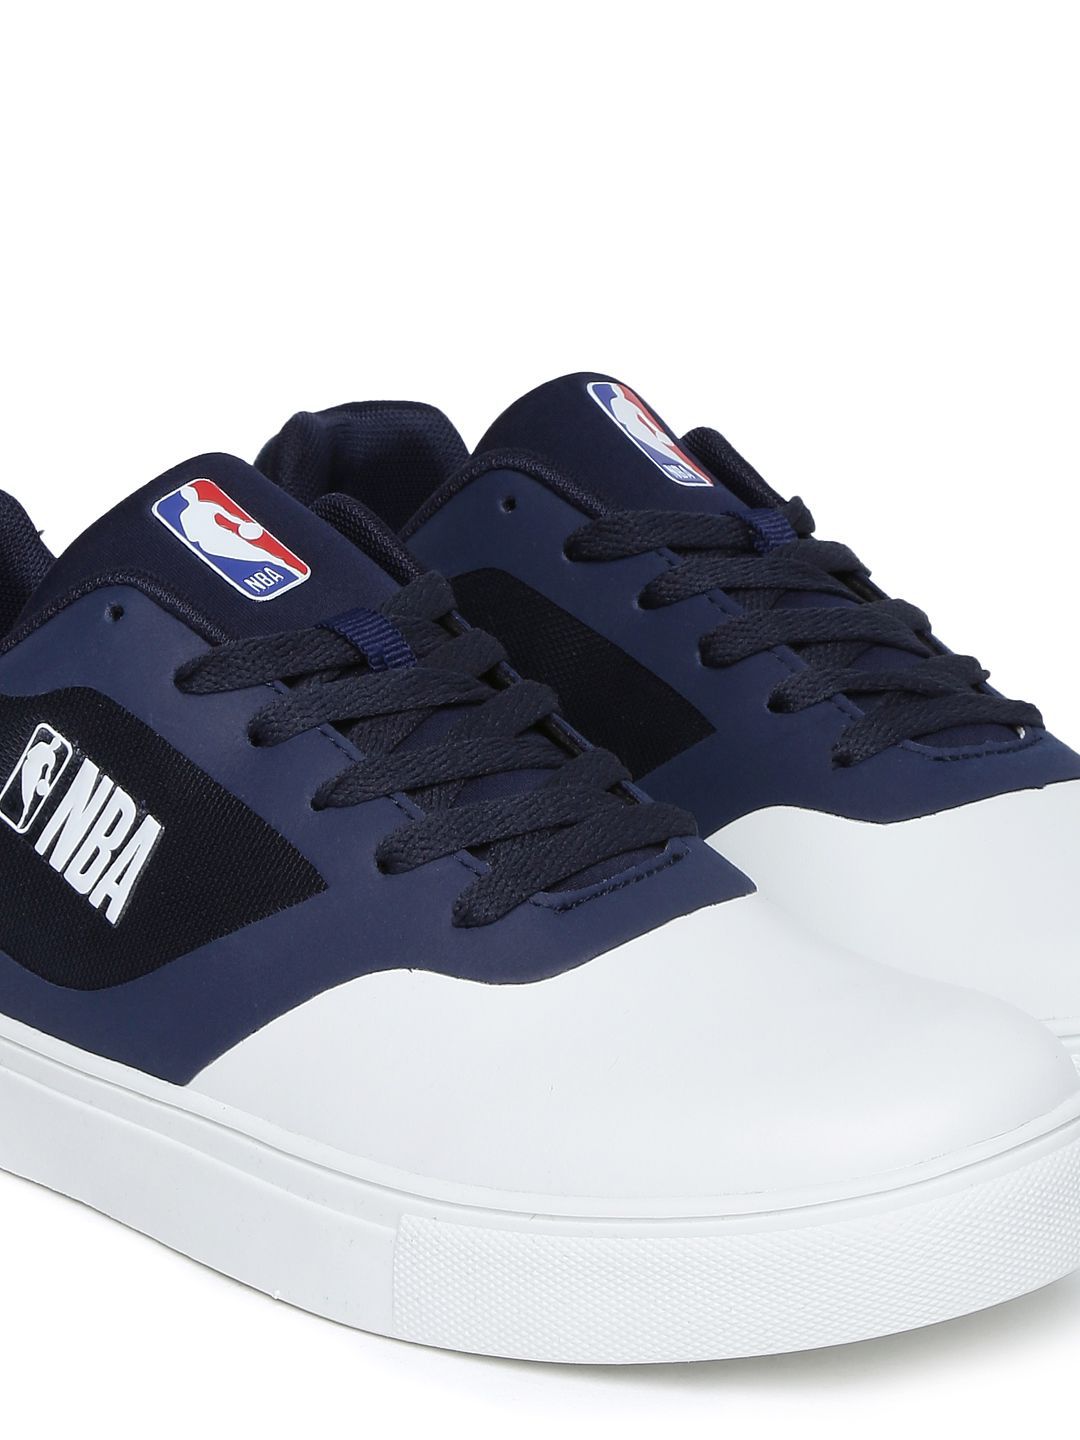 NBA Sneakers Navy Casual Shoes